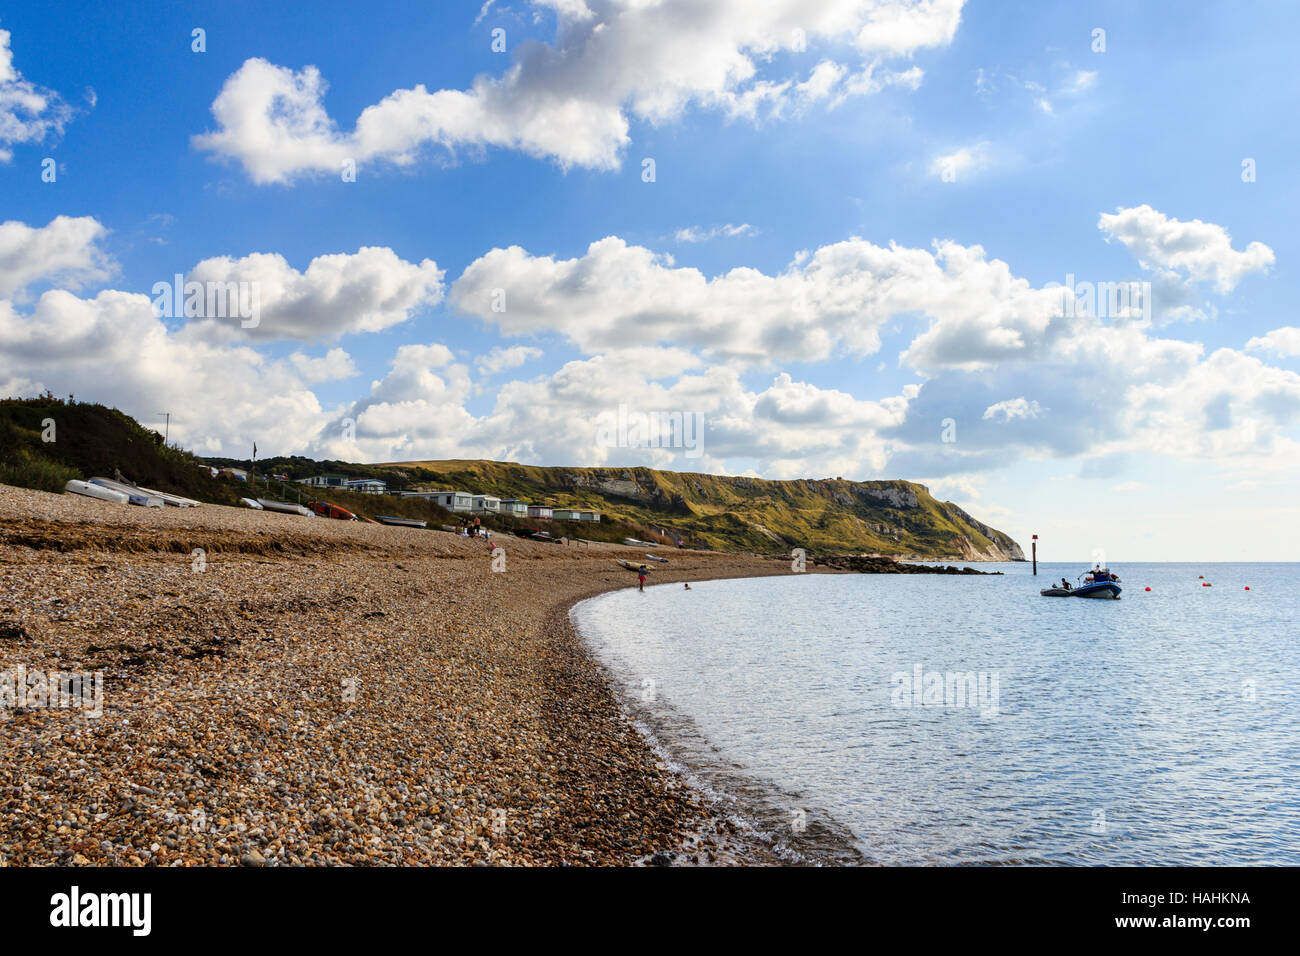 Ringstead Bay, Dorset, England, UK, burning cliff in the background Stock Photo